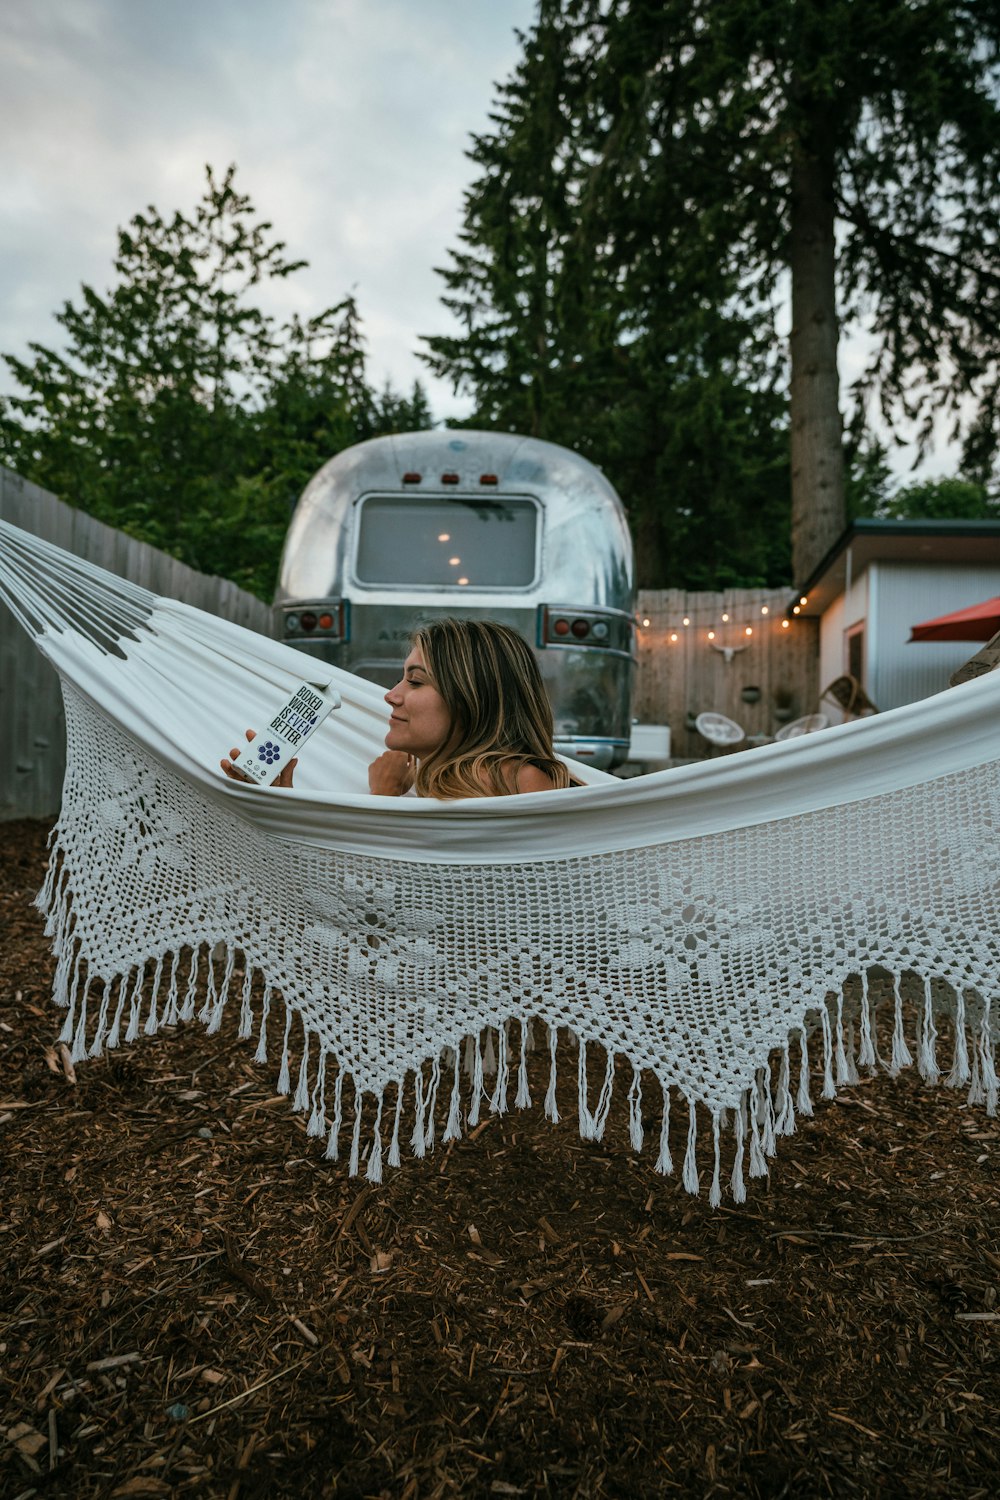 a woman sitting in a hammock with a trailer in the background